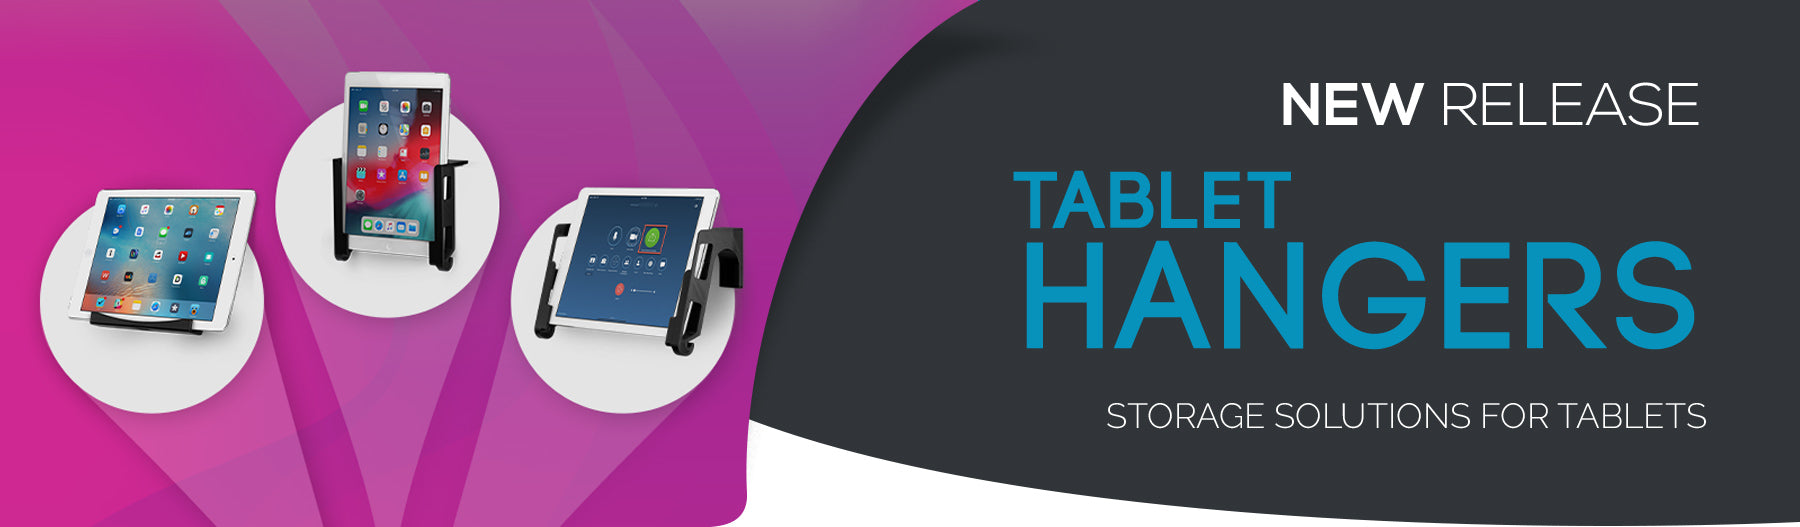 NEW - Storage Solutions for Tablets